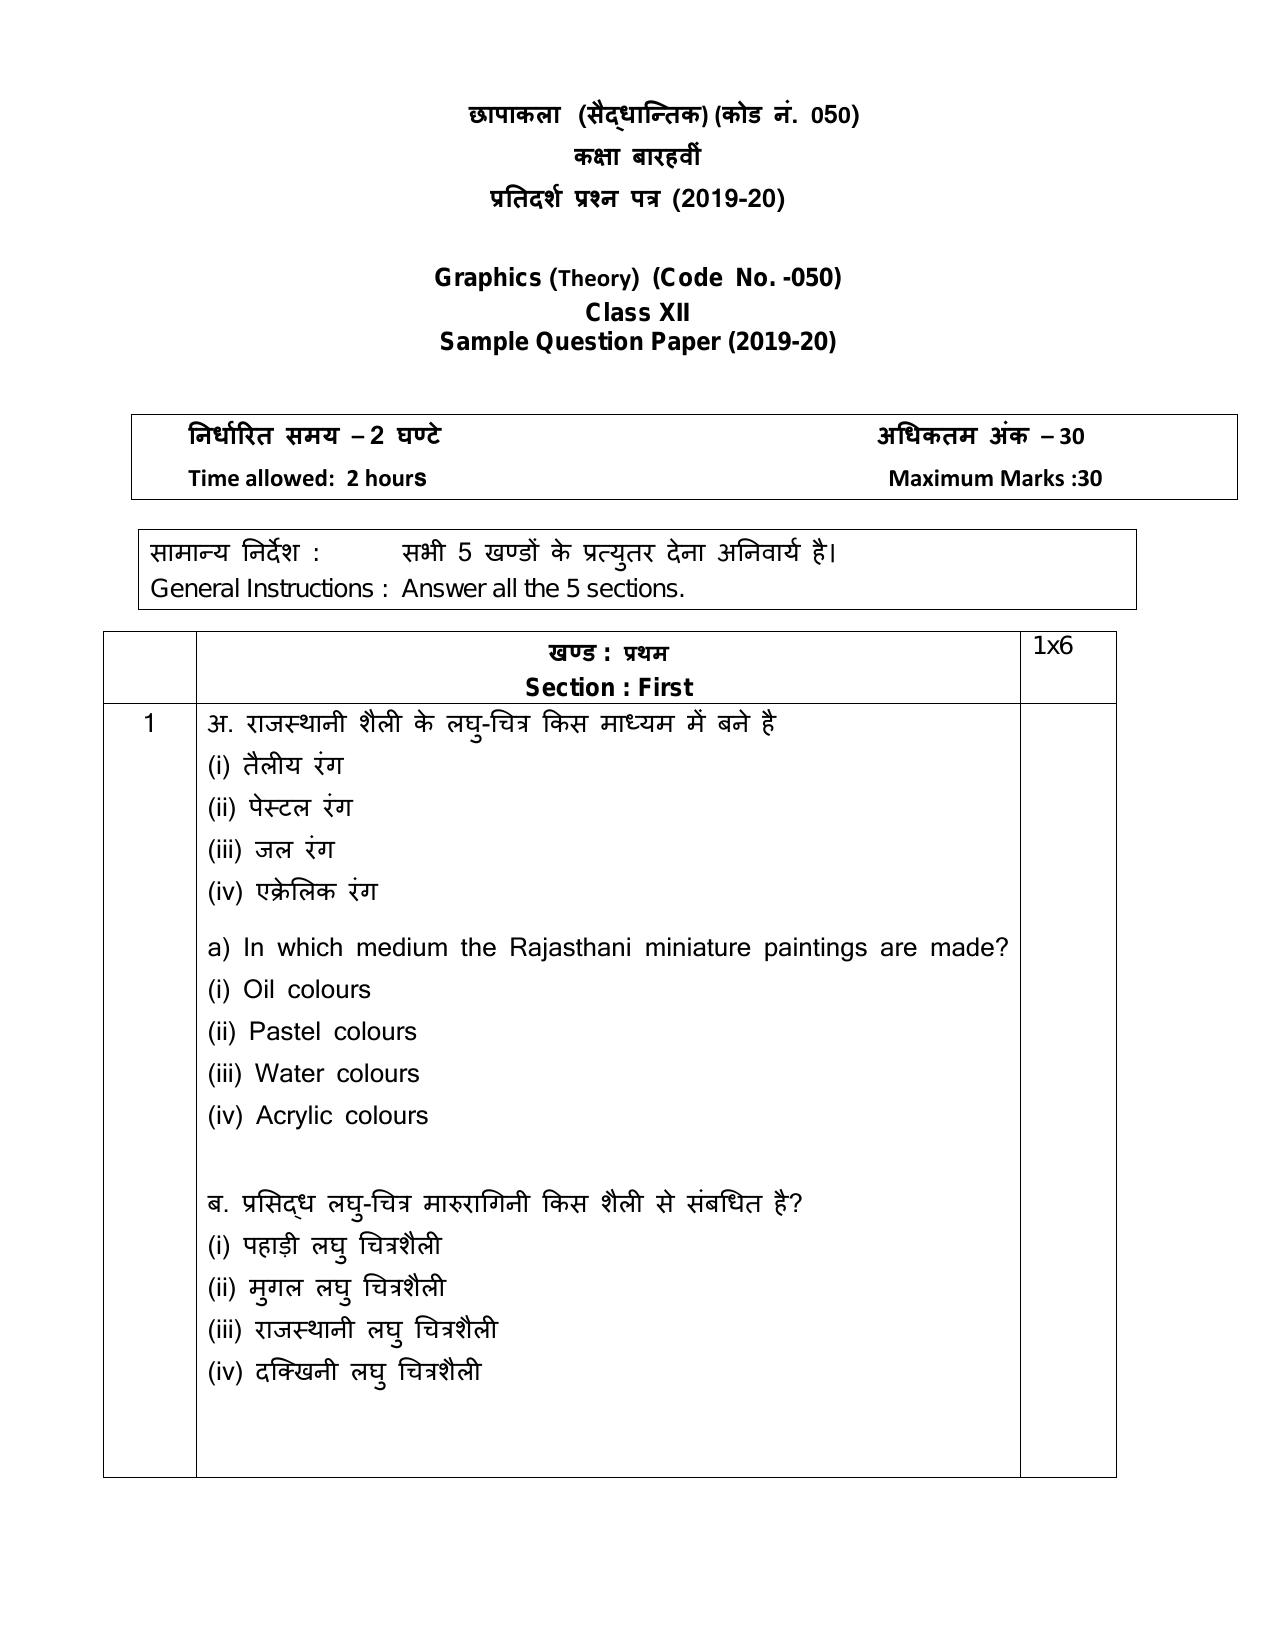 CBSE Class 12 Graphic -Sample Paper 2019-20 - Page 1